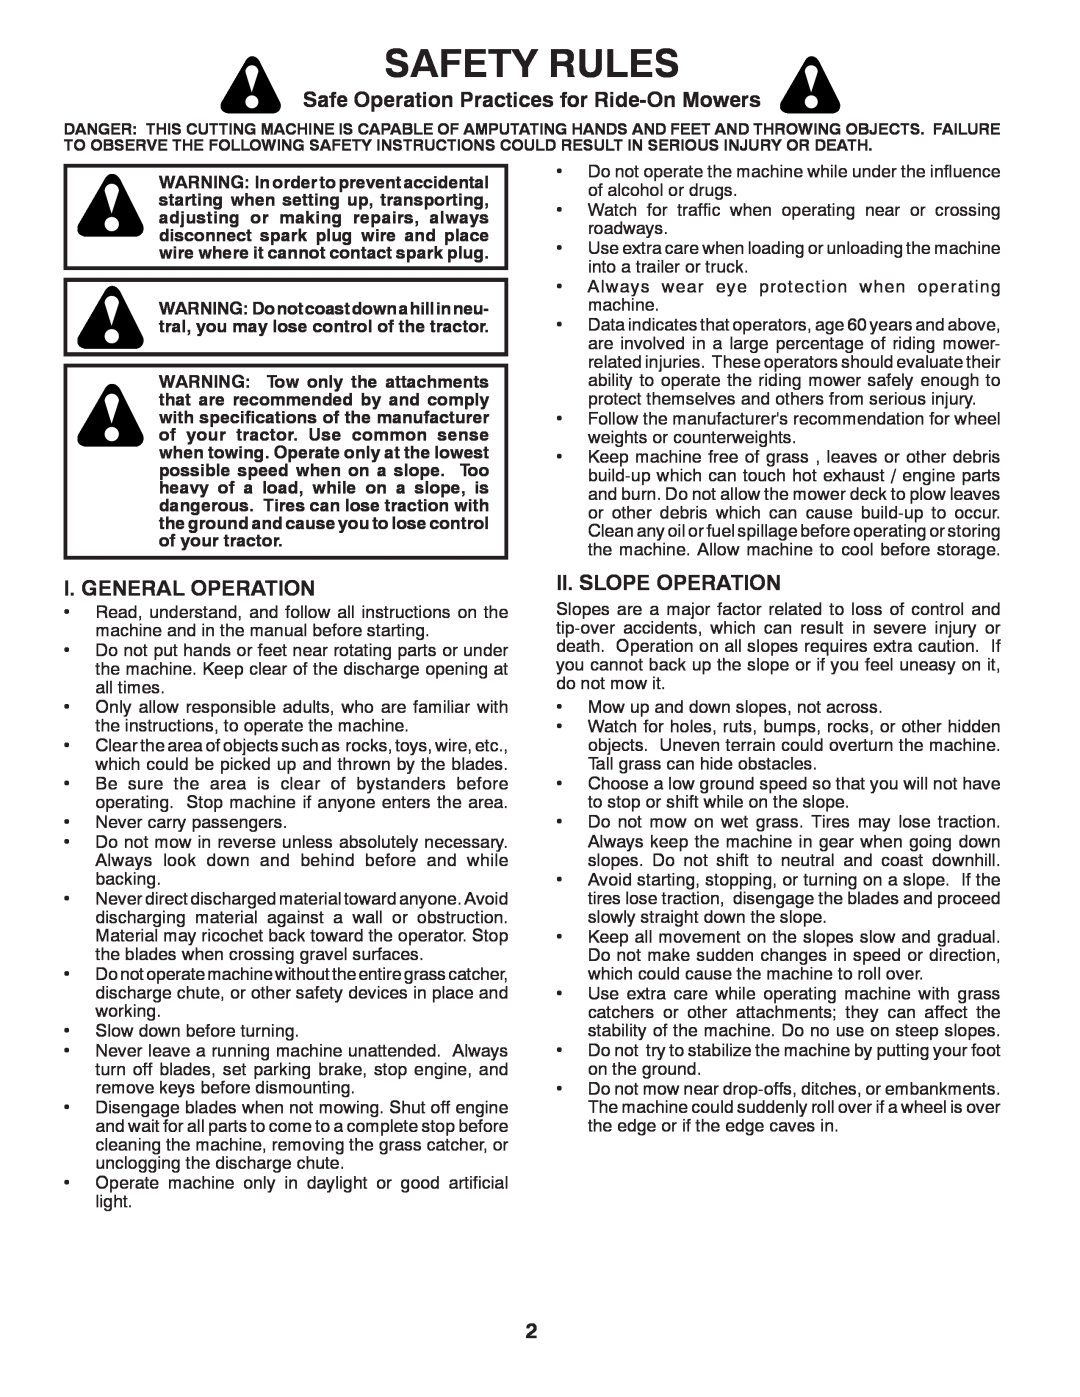 McCulloch 532 43 44-99 Safety Rules, Safe Operation Practices for Ride-OnMowers, I. General Operation, Ii. Slope Operation 